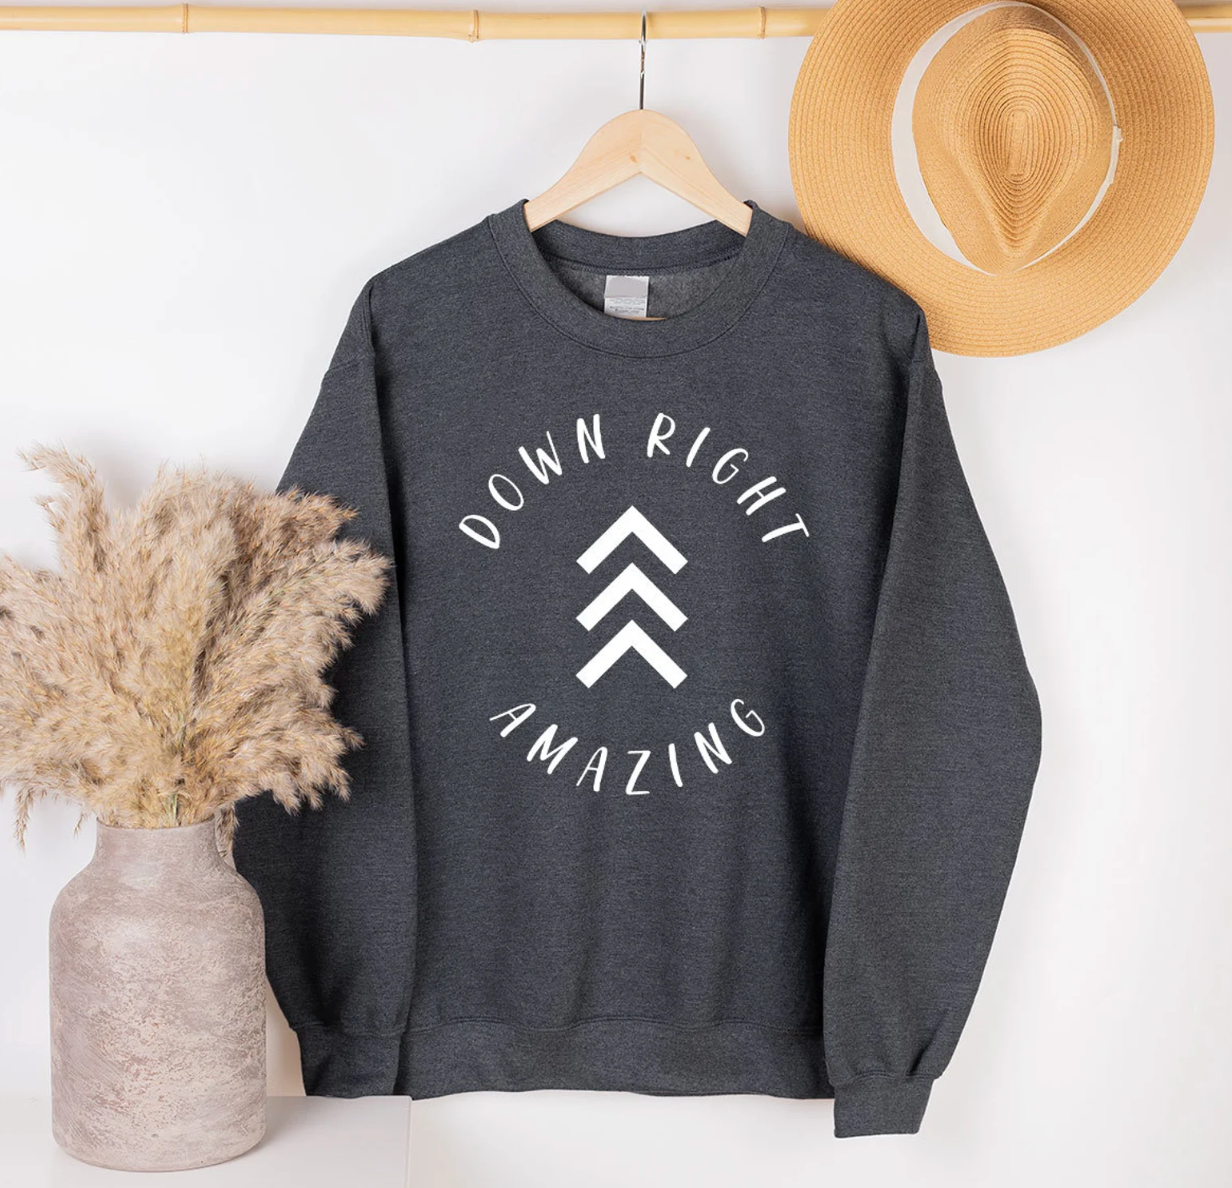 Down Right Amazing Down Syndrome Awareness Crewneck